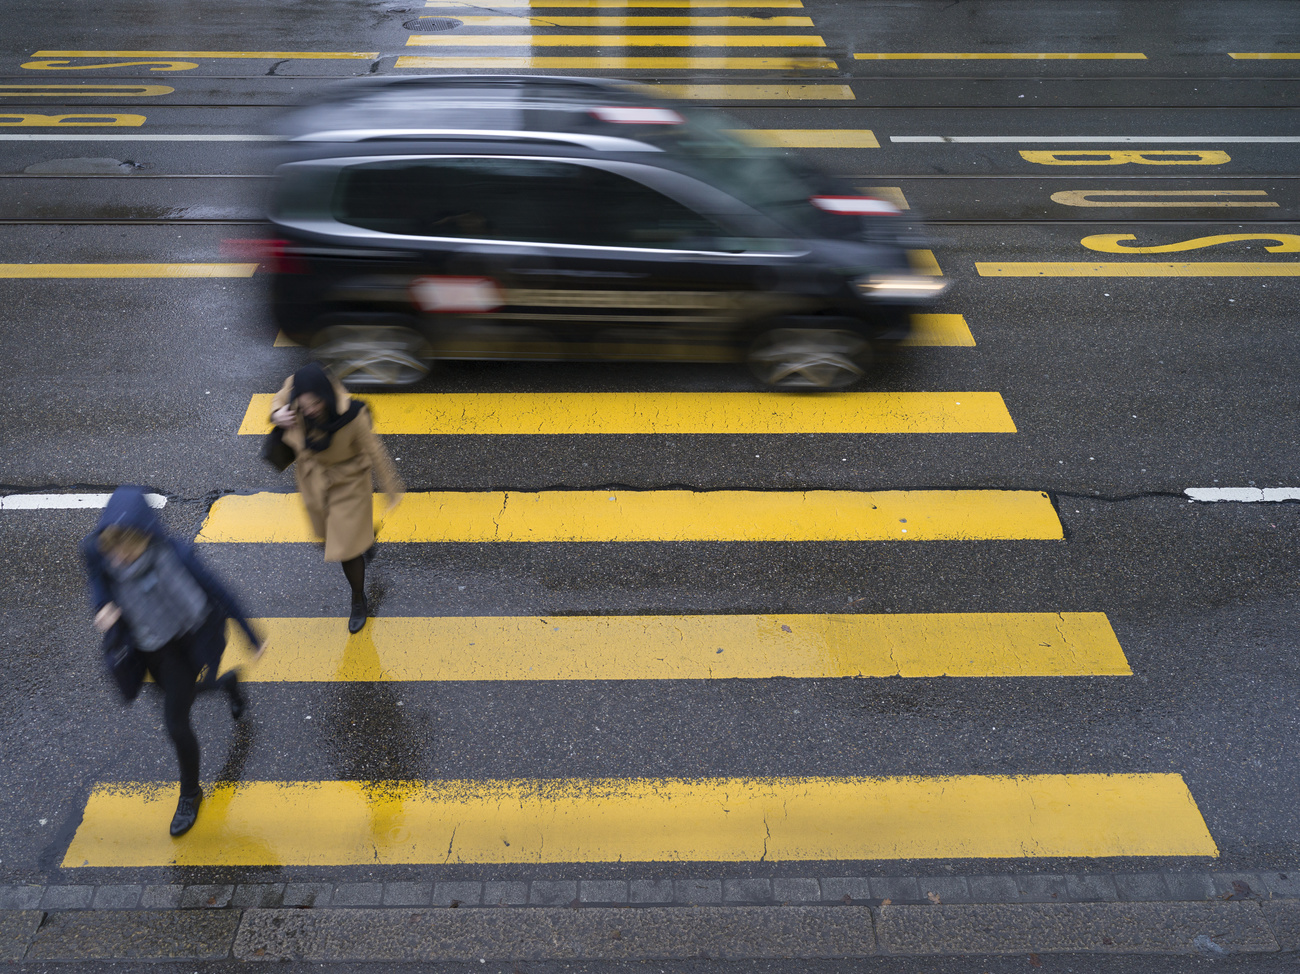 Two pedestrians, one in a blue coat, one in a beige mac, cross a yellow-striped pedestrian crossing on a road. Behind them, a black car drives over the crossing. They are blurred, the yellow crossing lines are in focus.